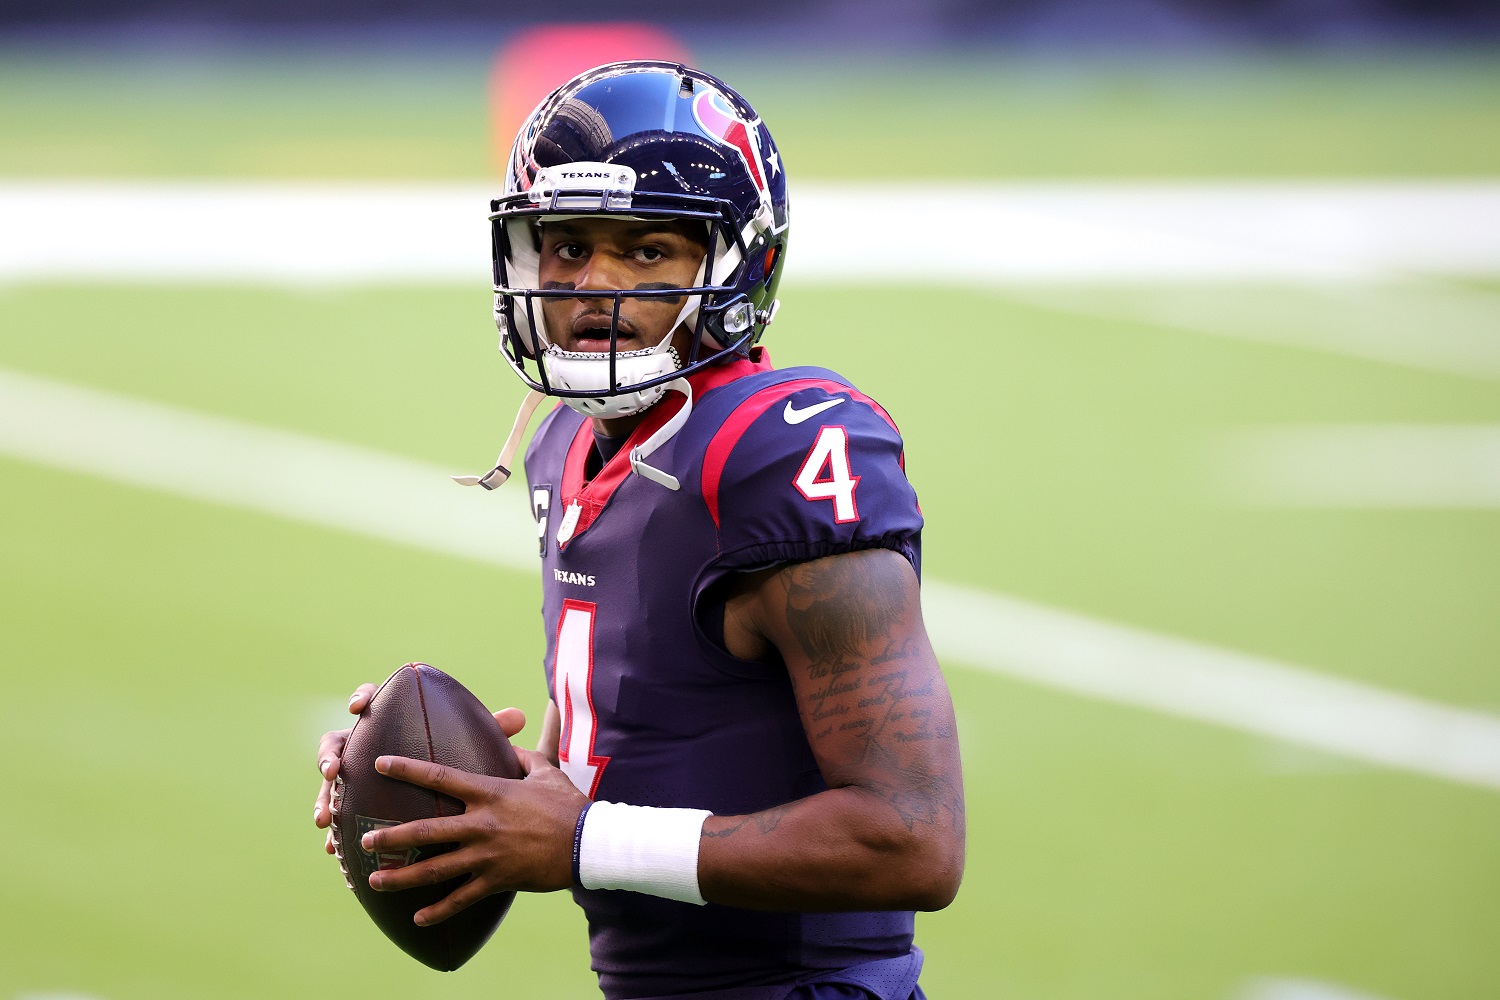 Deshaun Watson of the Houston Texans in action against the Tennessee Titans on Jan. 3, 2021, in Houston, Texas. | Carmen Mandato/Getty Images